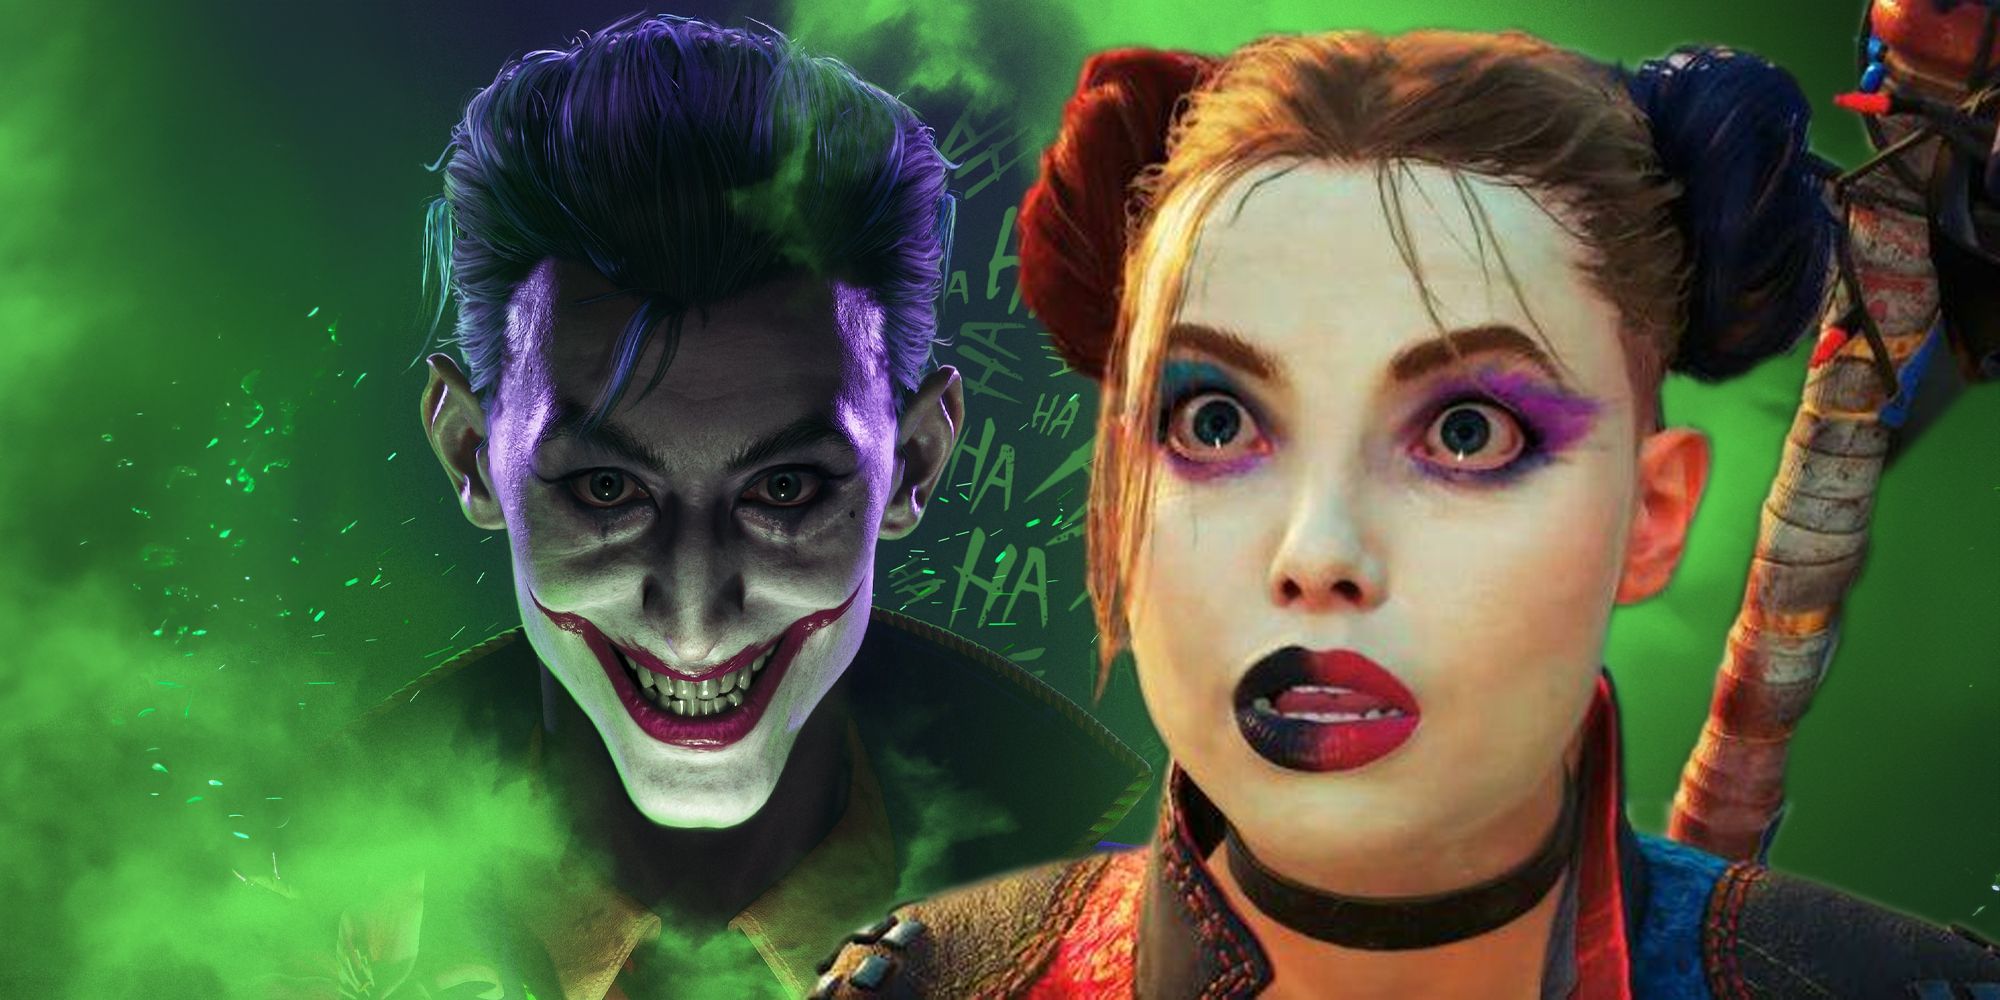 Joker emerging from green gas, with Harley looking shocked